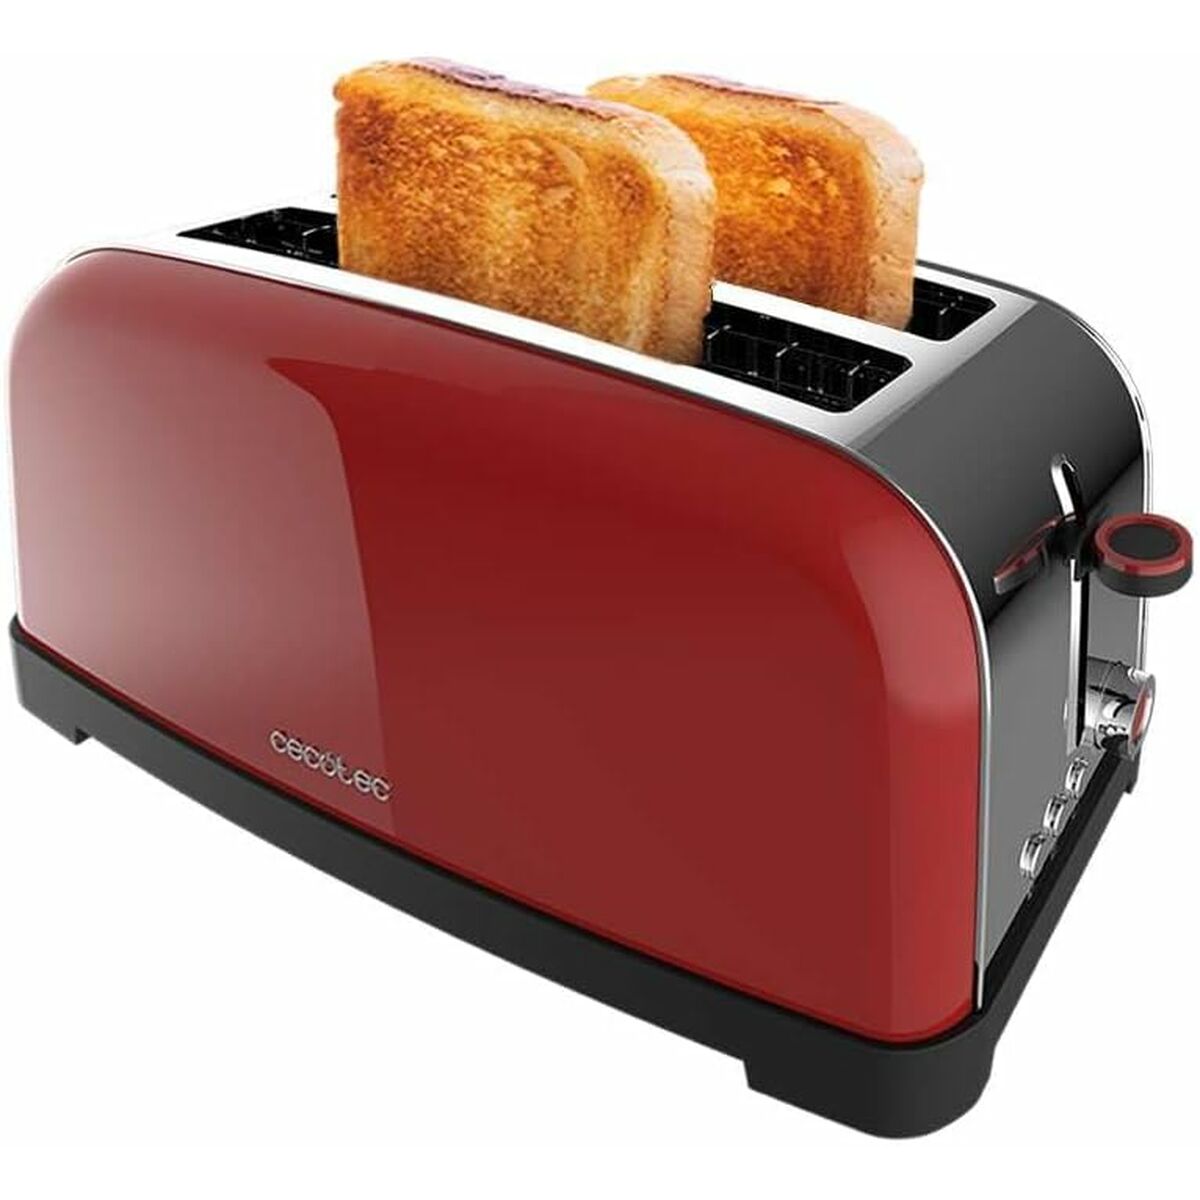 Broodrooster Cecotec Toastin' time 1500 1500 W